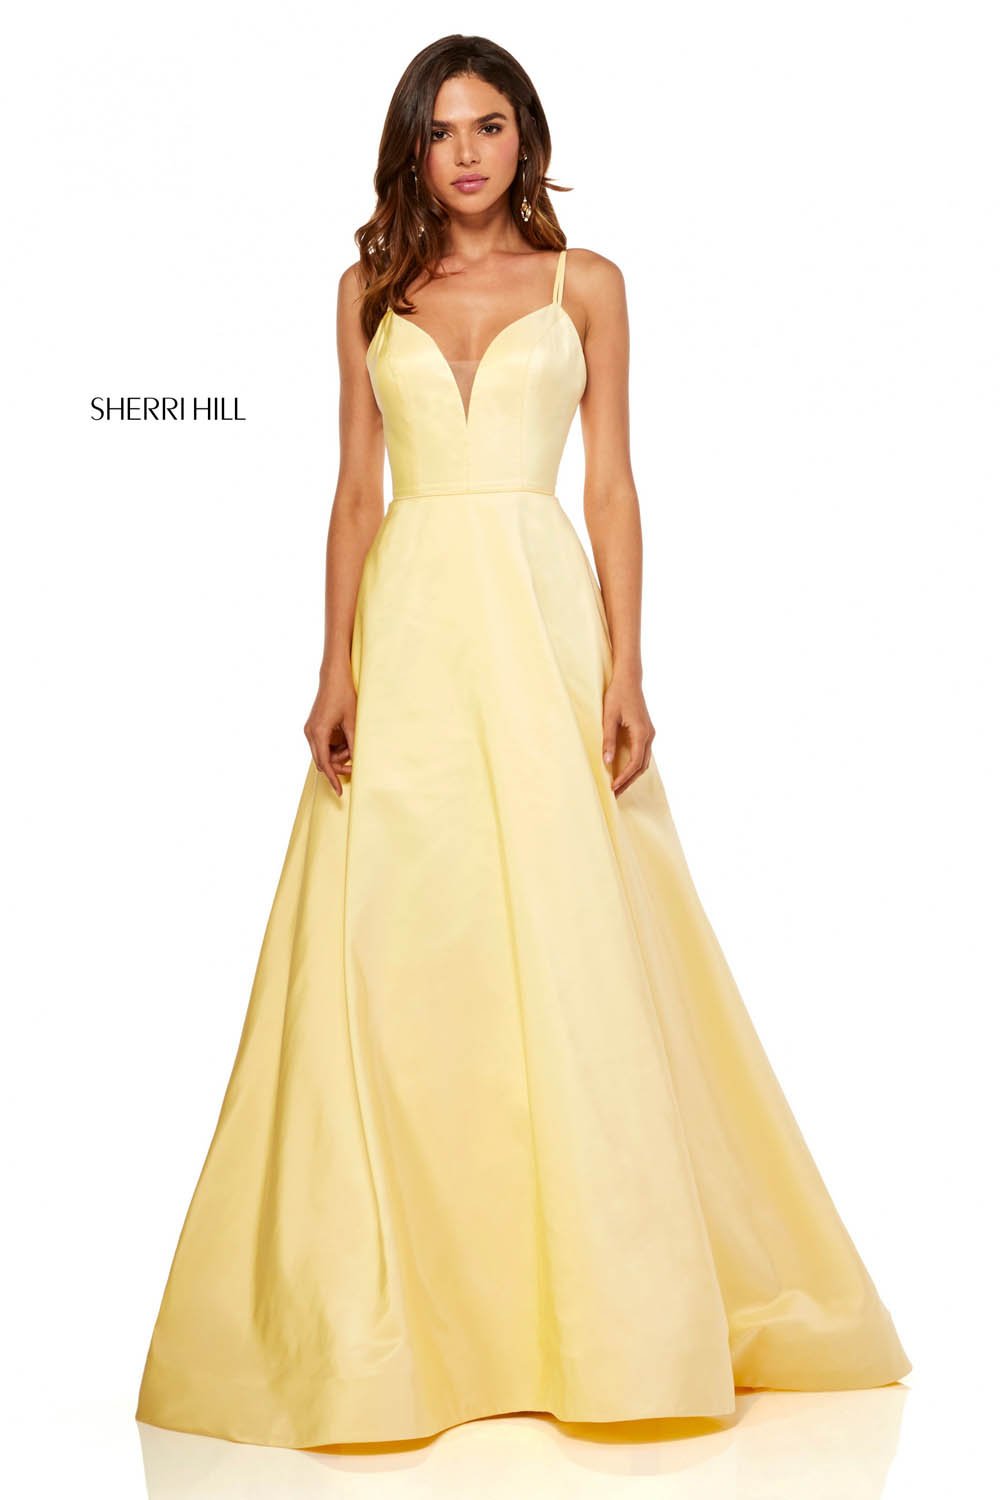 Sherri Hill 52506 dress images in these colors: Yellow.